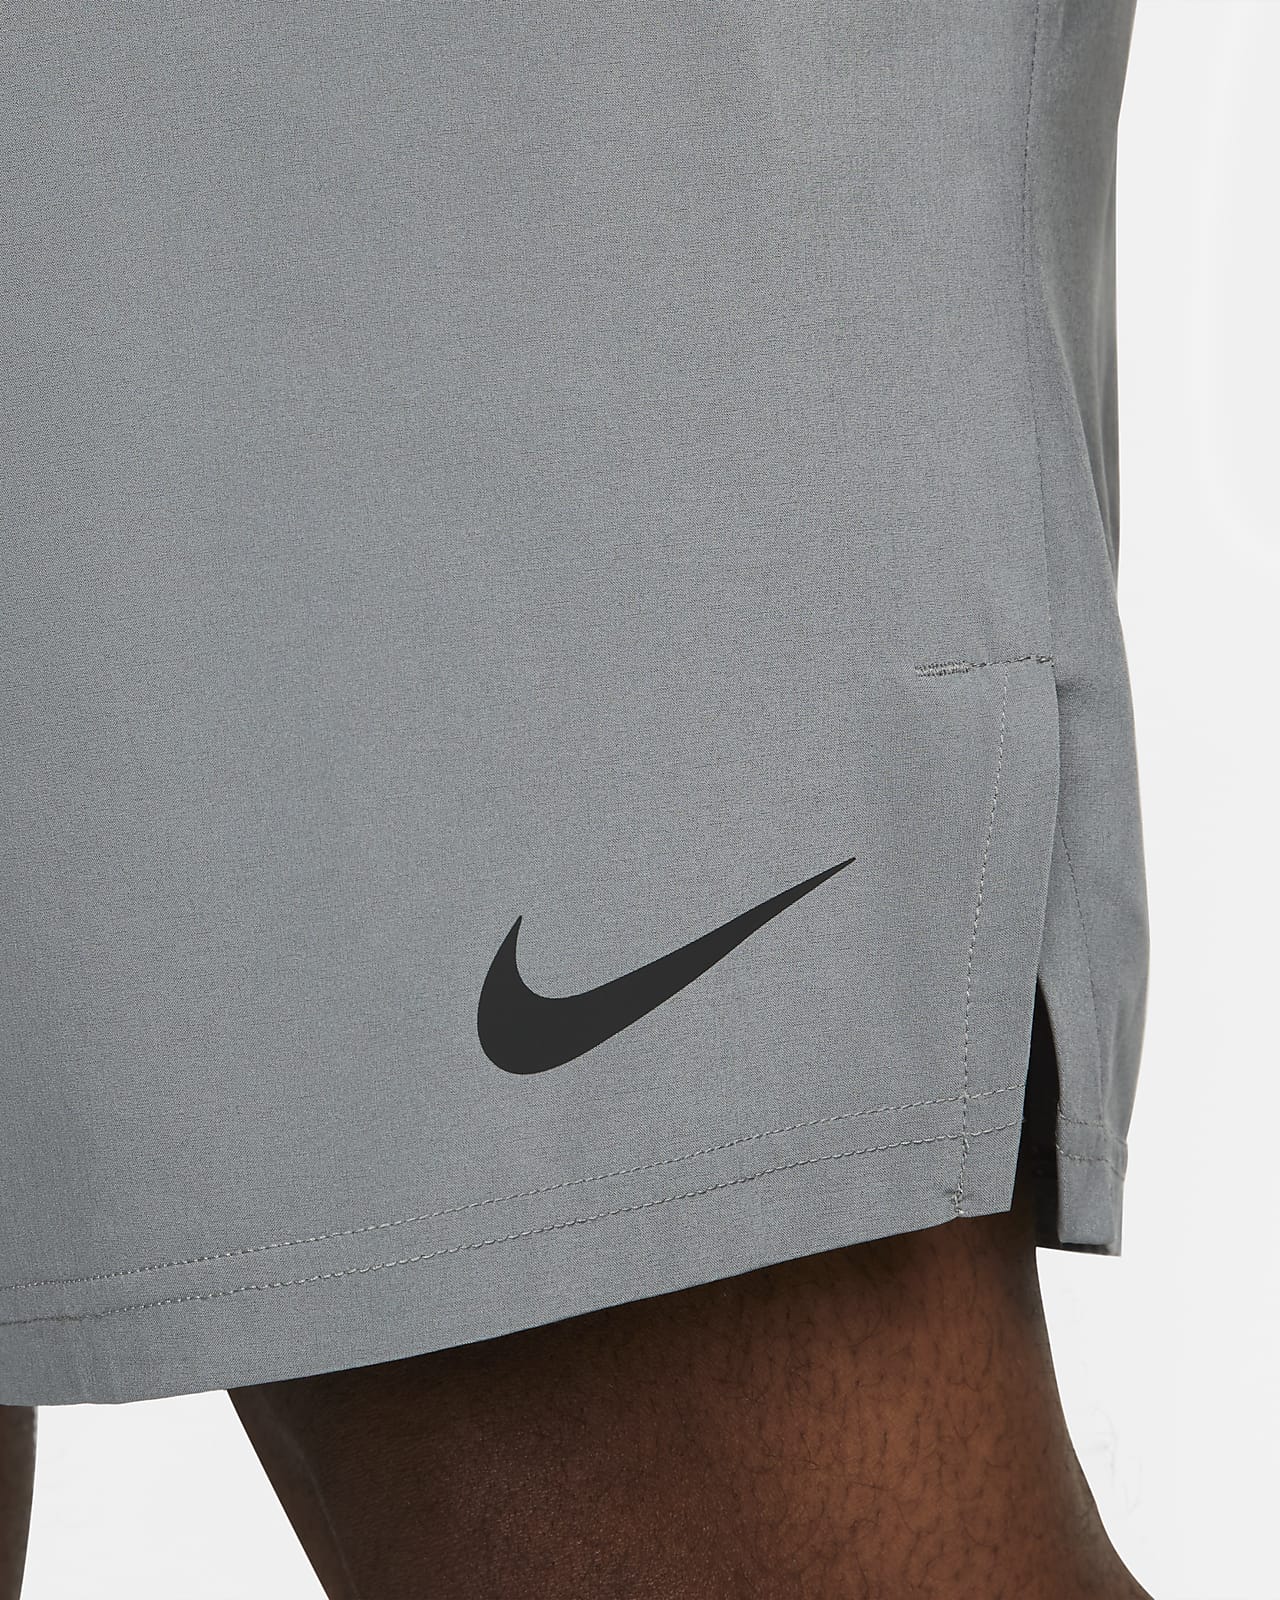 Nike Dri-fit Specialized Shorts in Black for Men